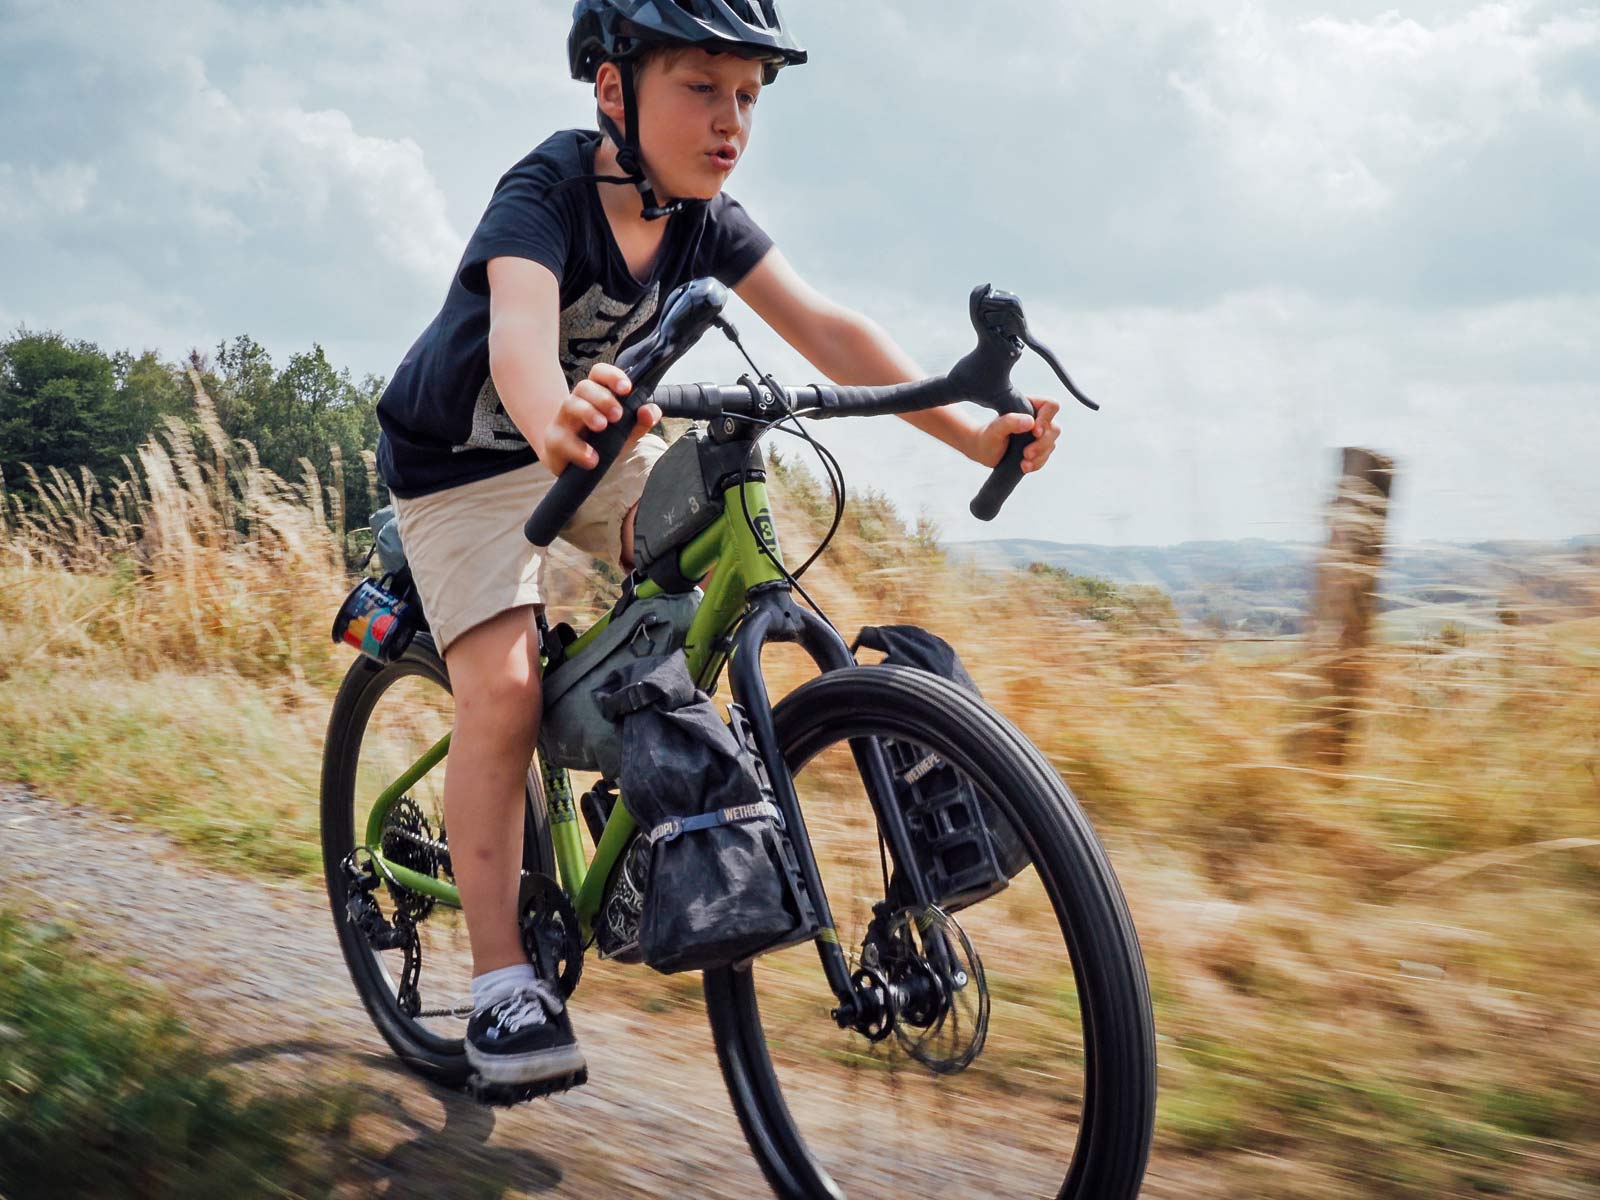 Family bikepacking with Clem and Lubin in The Analog Kids, Bombtrack photos by Marvin Beranek